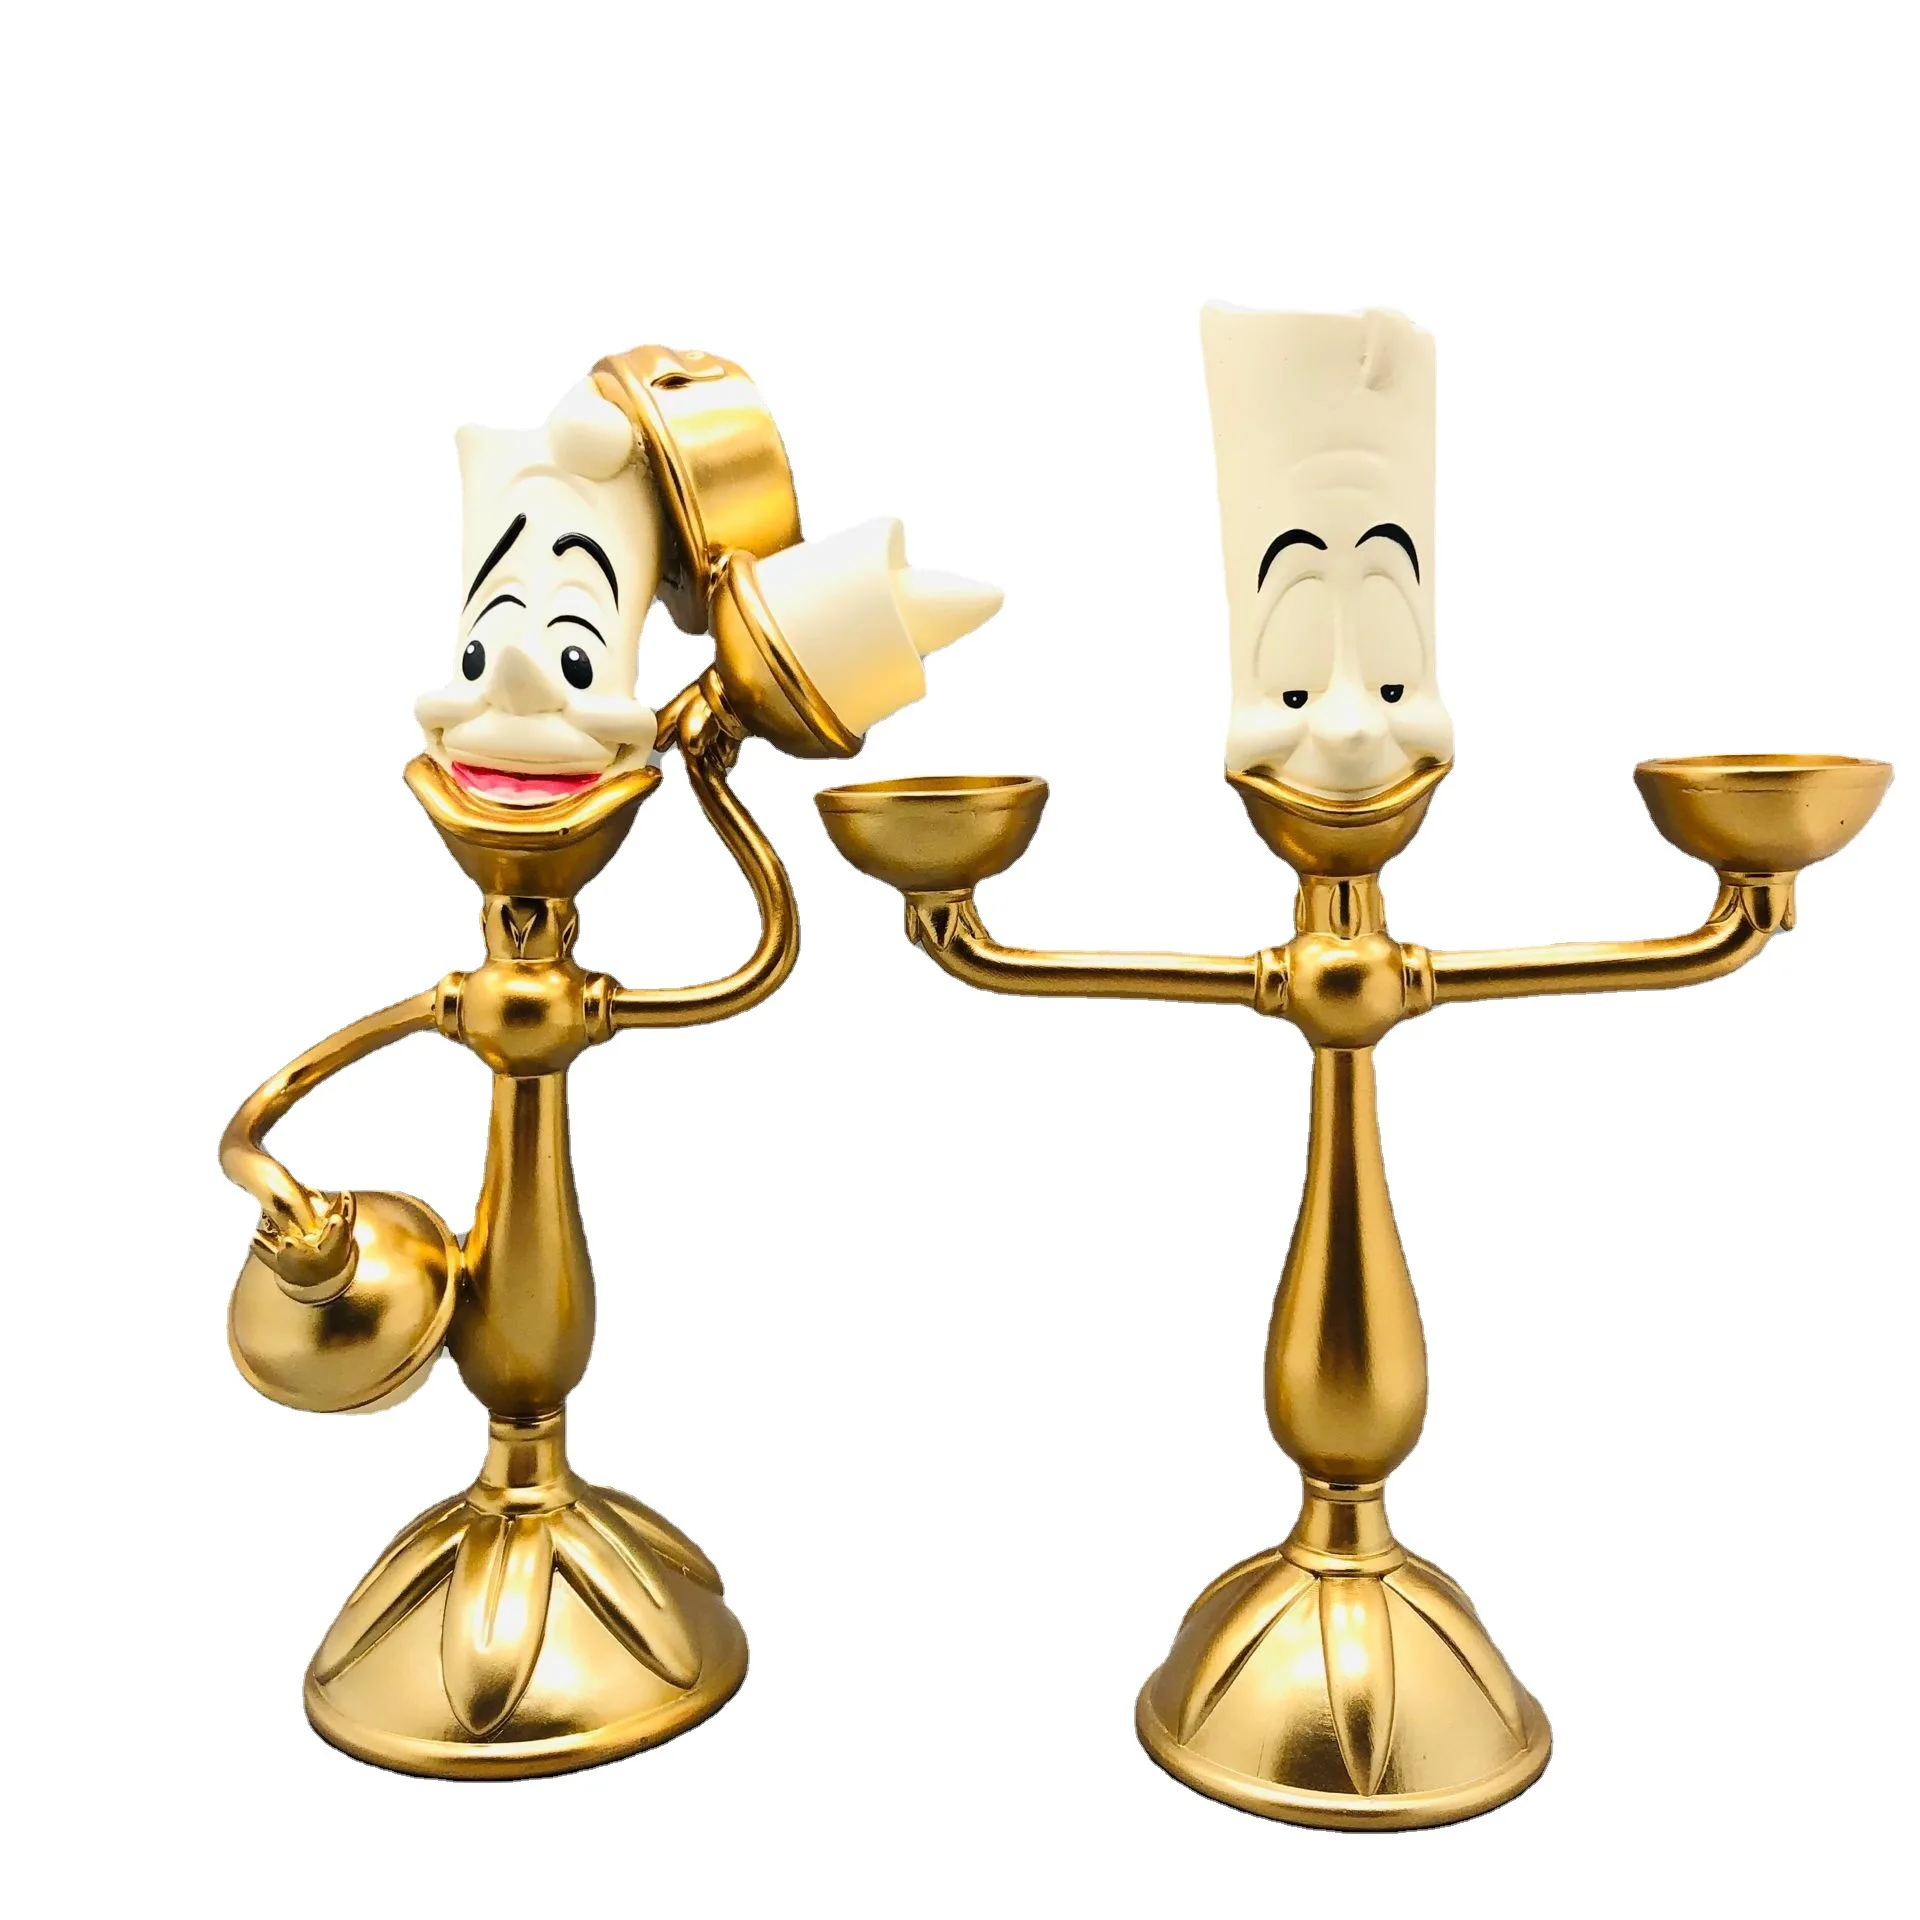 New Arrival Beauty And The Beast Lumiere Candle Holder Ornaments Cogsworth Clock Tea Set Collection Creative Birthday Xmas Gift